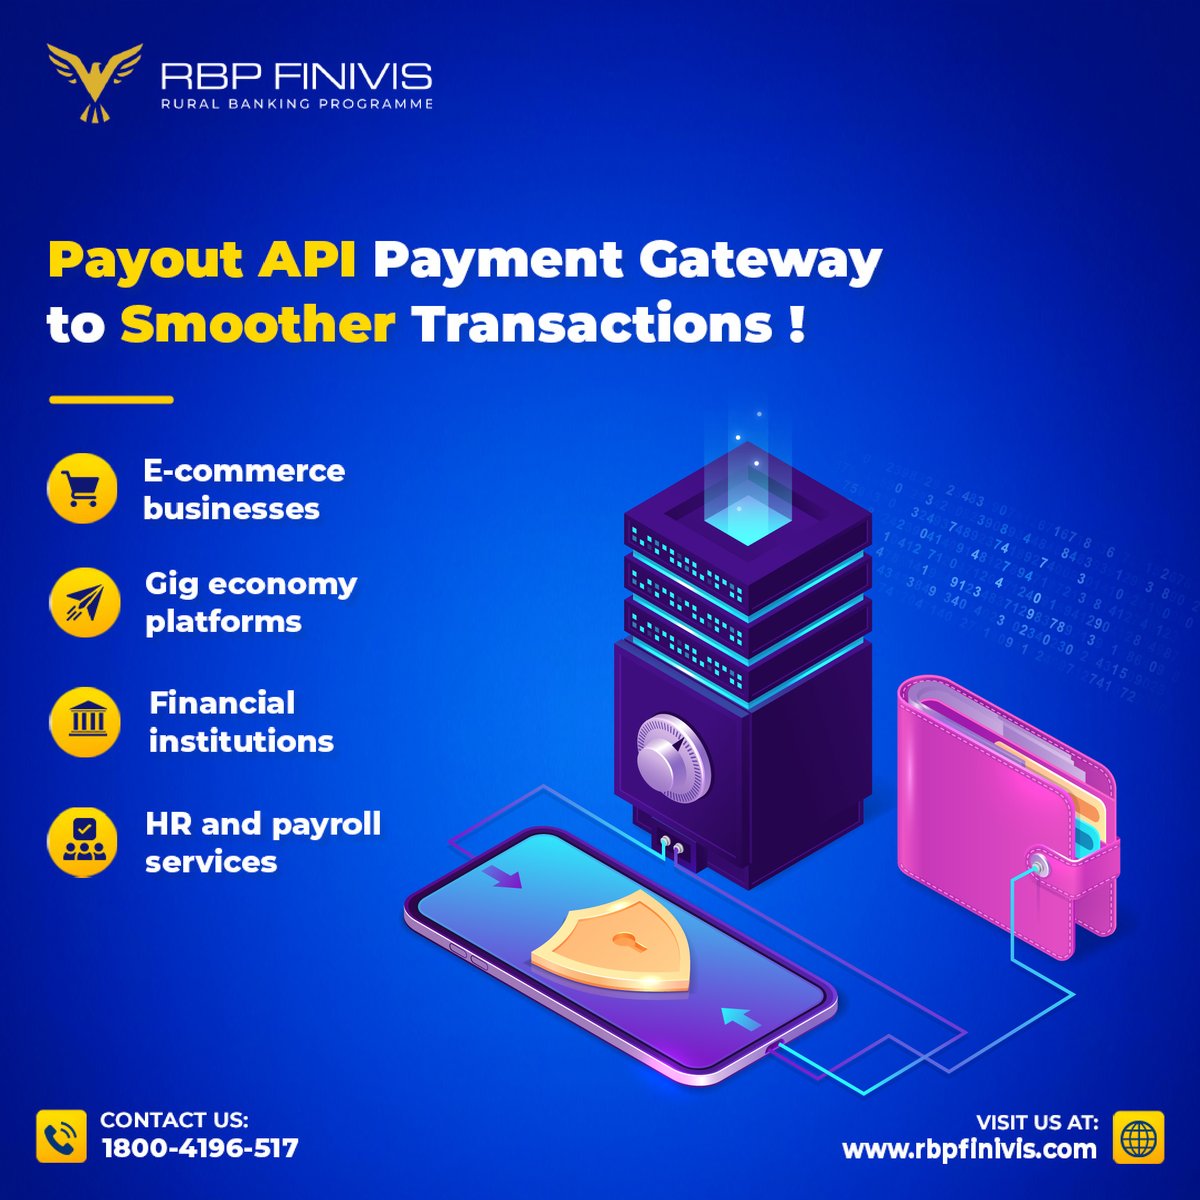 #Payout #API #Payment #gateway to smoother #transactions.

Visit: rbpfinivis.com
Contact us: 1800-4196-571

#FastPayouts #BusinessBoost #InnovationUnleashed #payoutapi #rbpfinivis #fintech #payments #digitalpayments #securepayment #securetransactions #megopay